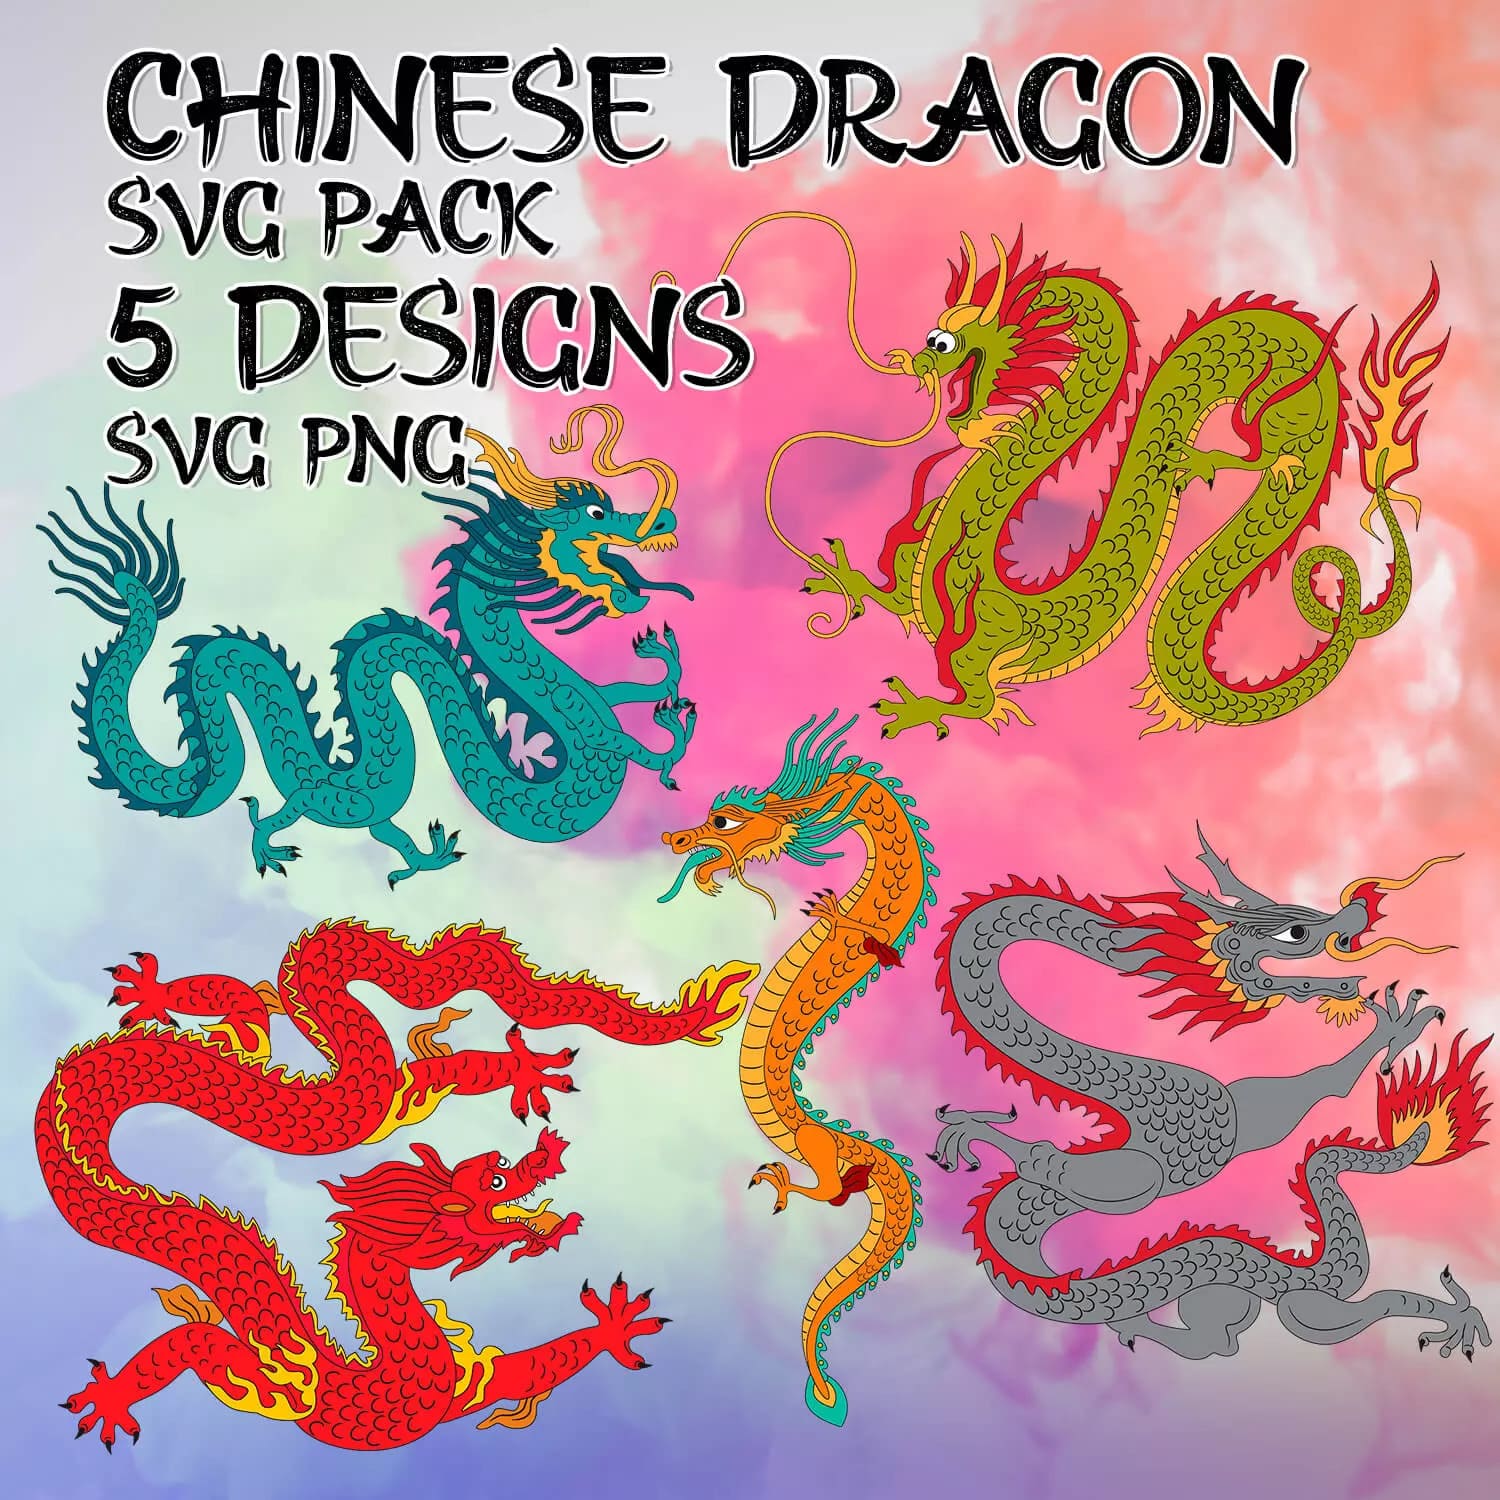 Chinese Dragon SVG Preview image.